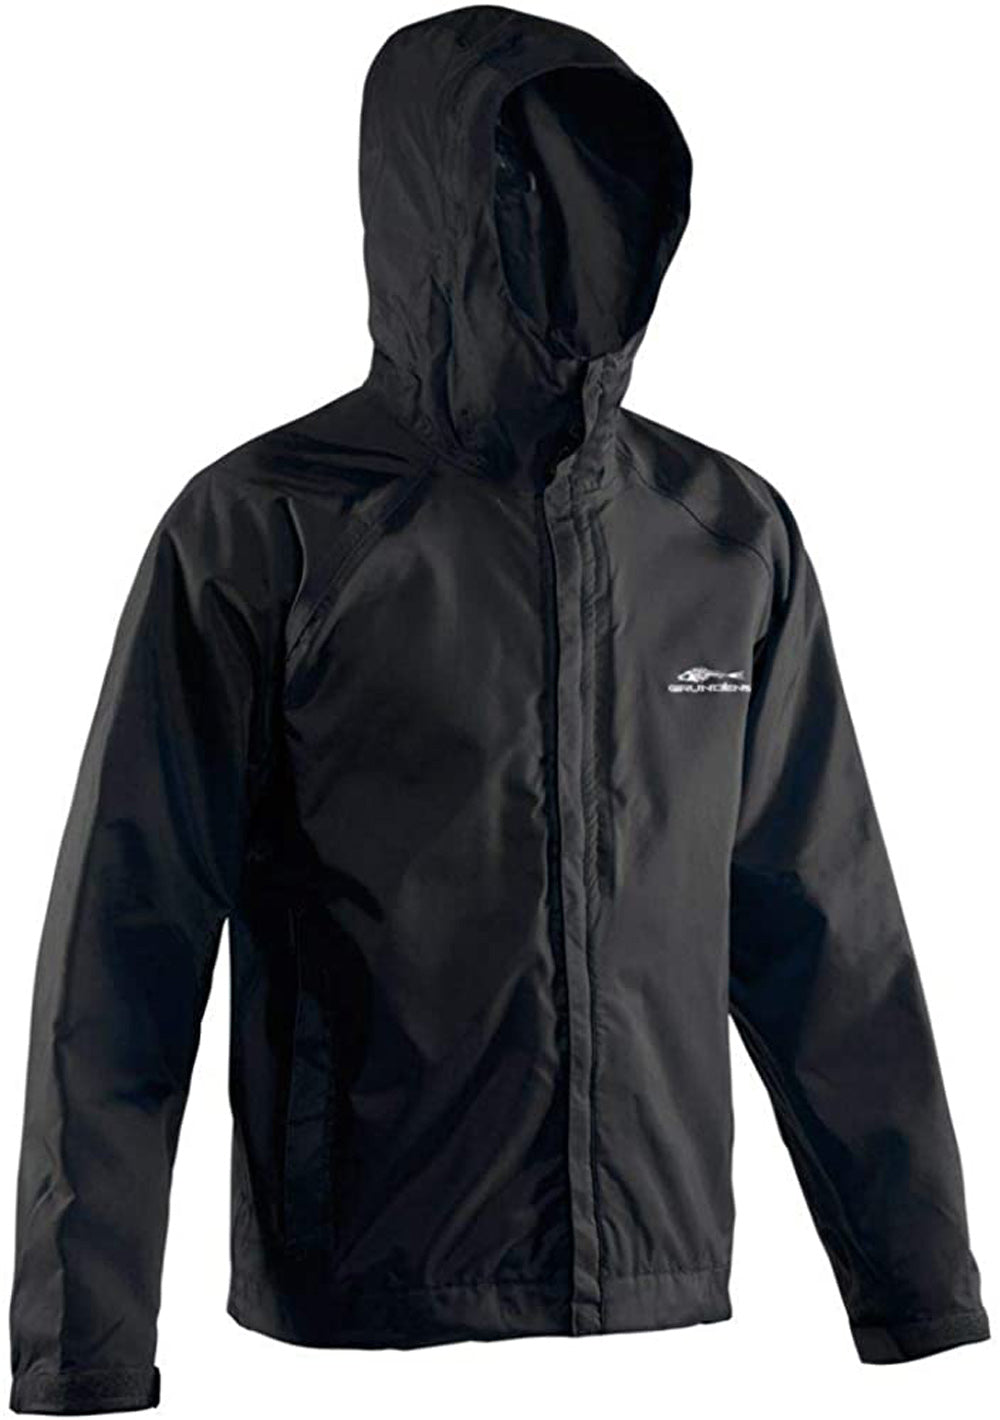 Weather Watch Jacket in Black color from the front view